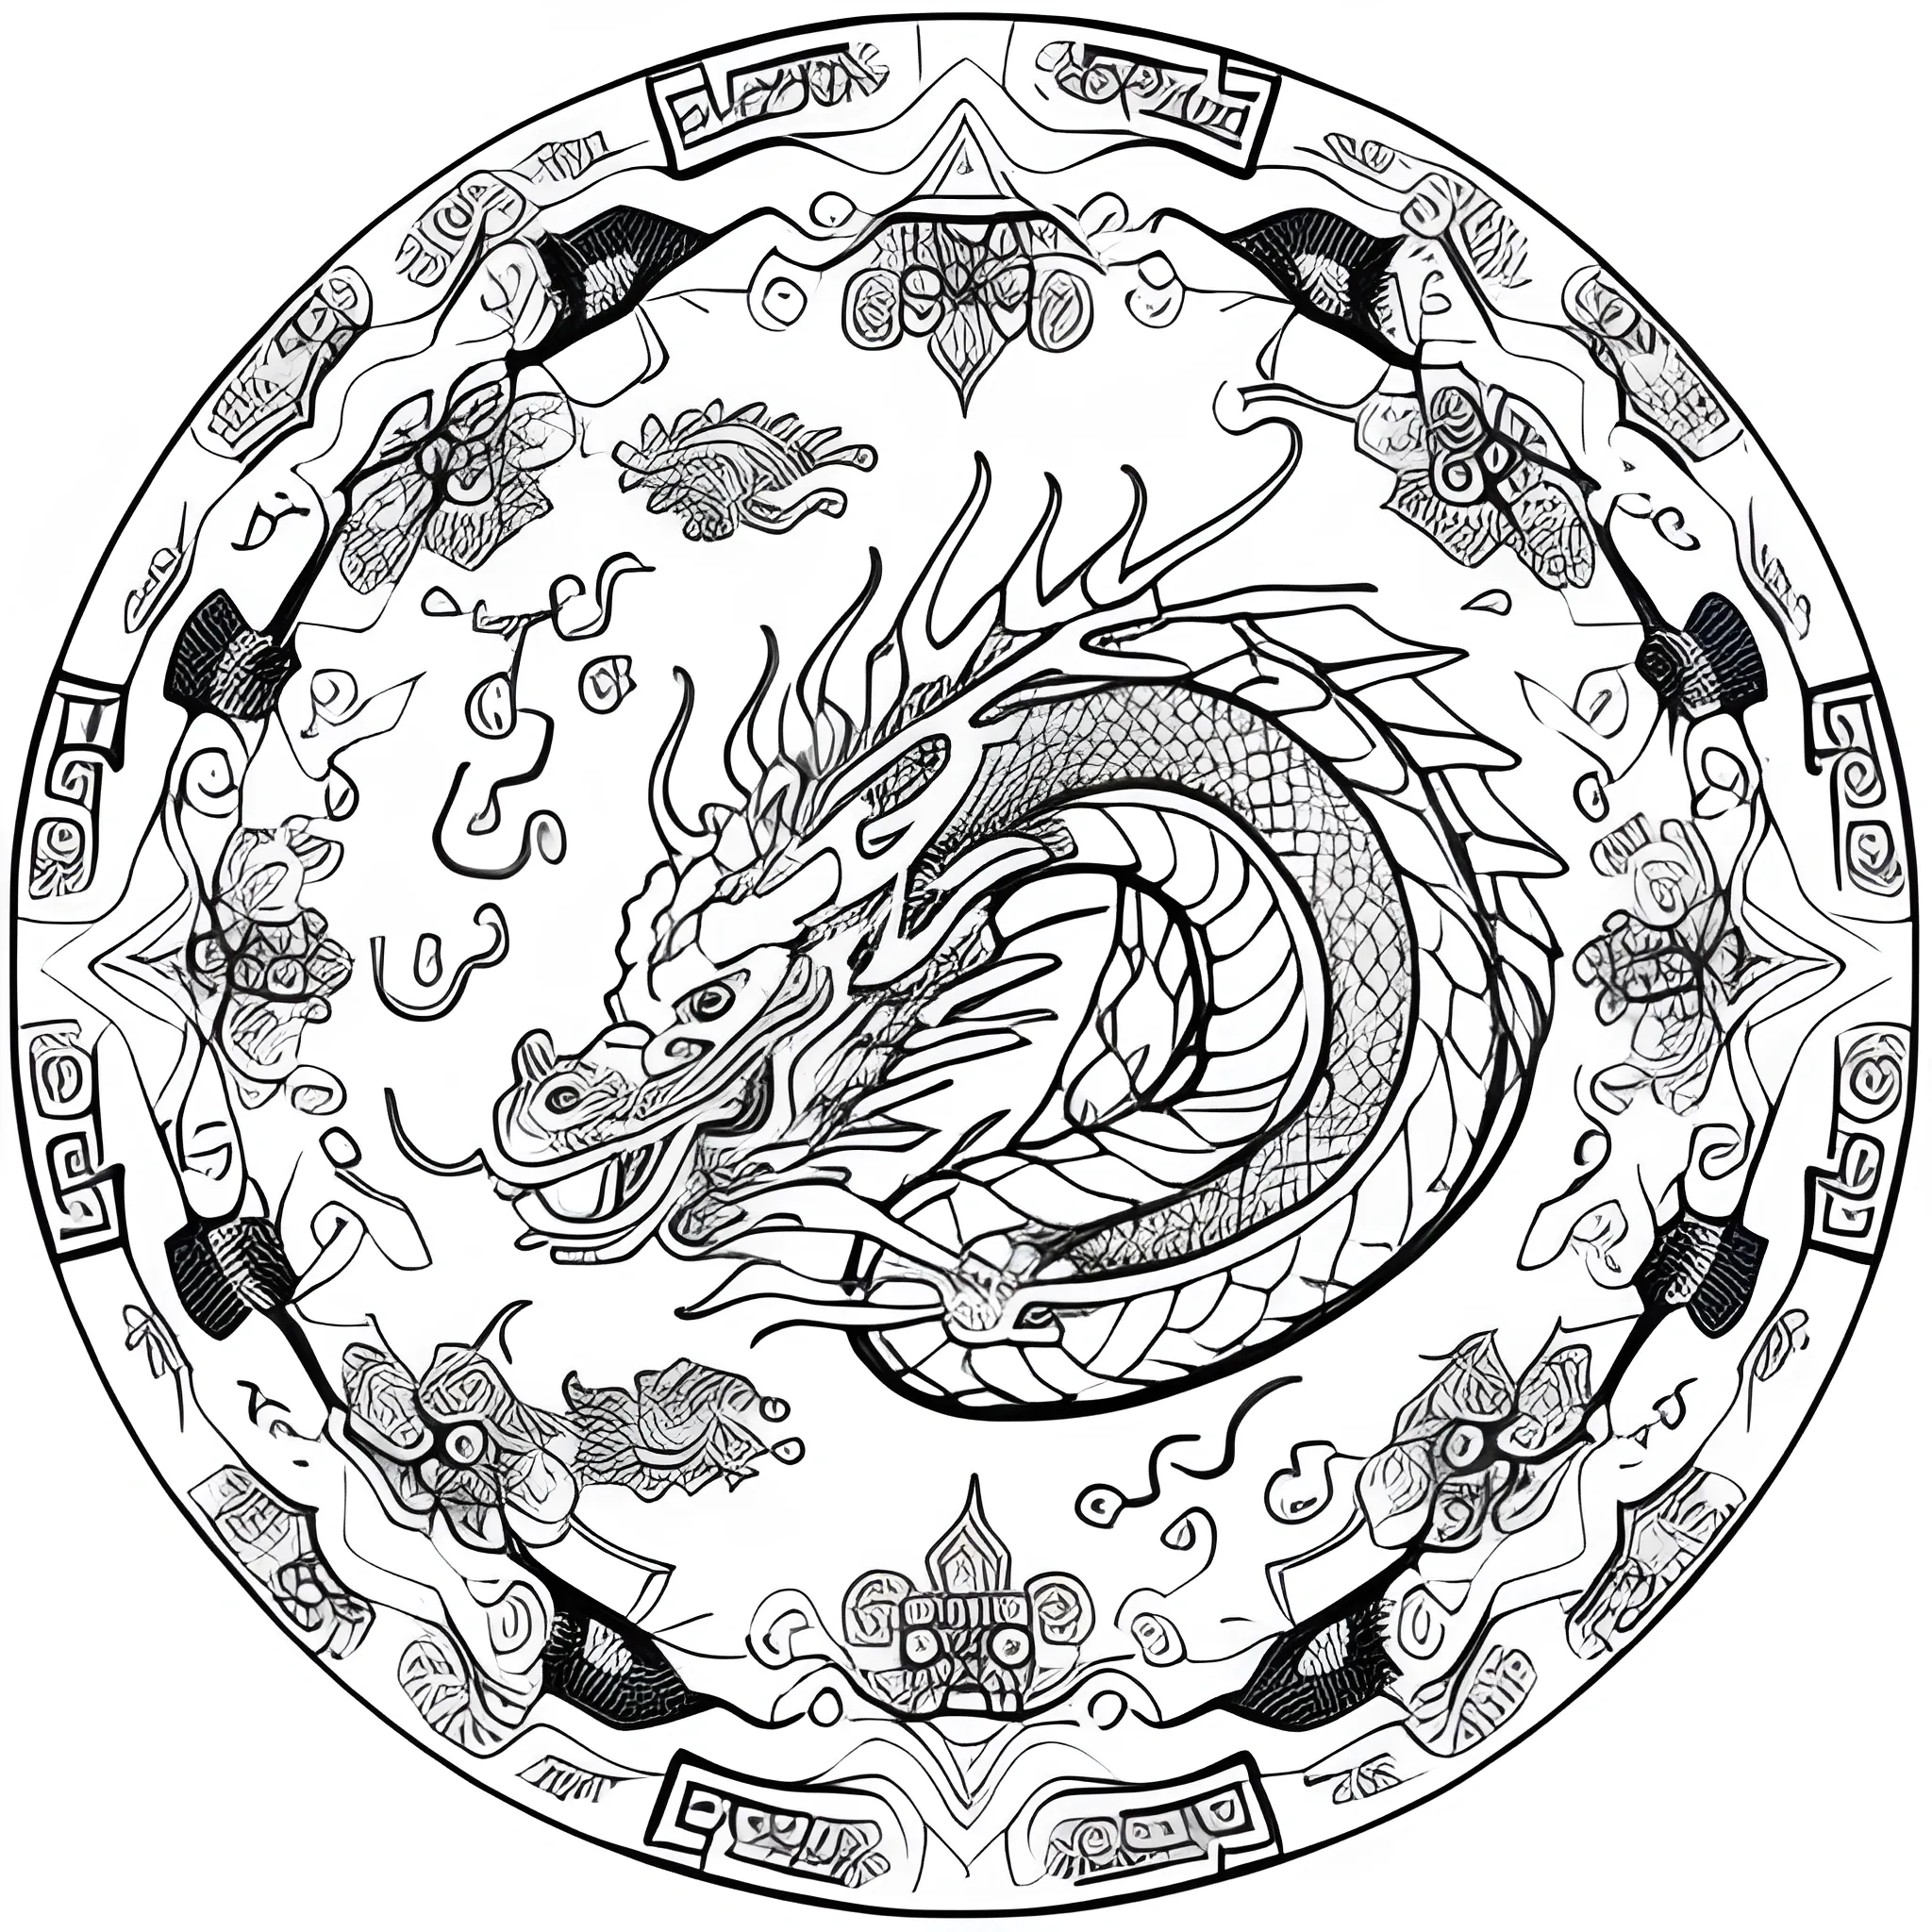 coloring book page, detailed mandal dragon, inside a floral circle, white background, stencil bold lines, inspired in the chineese culture